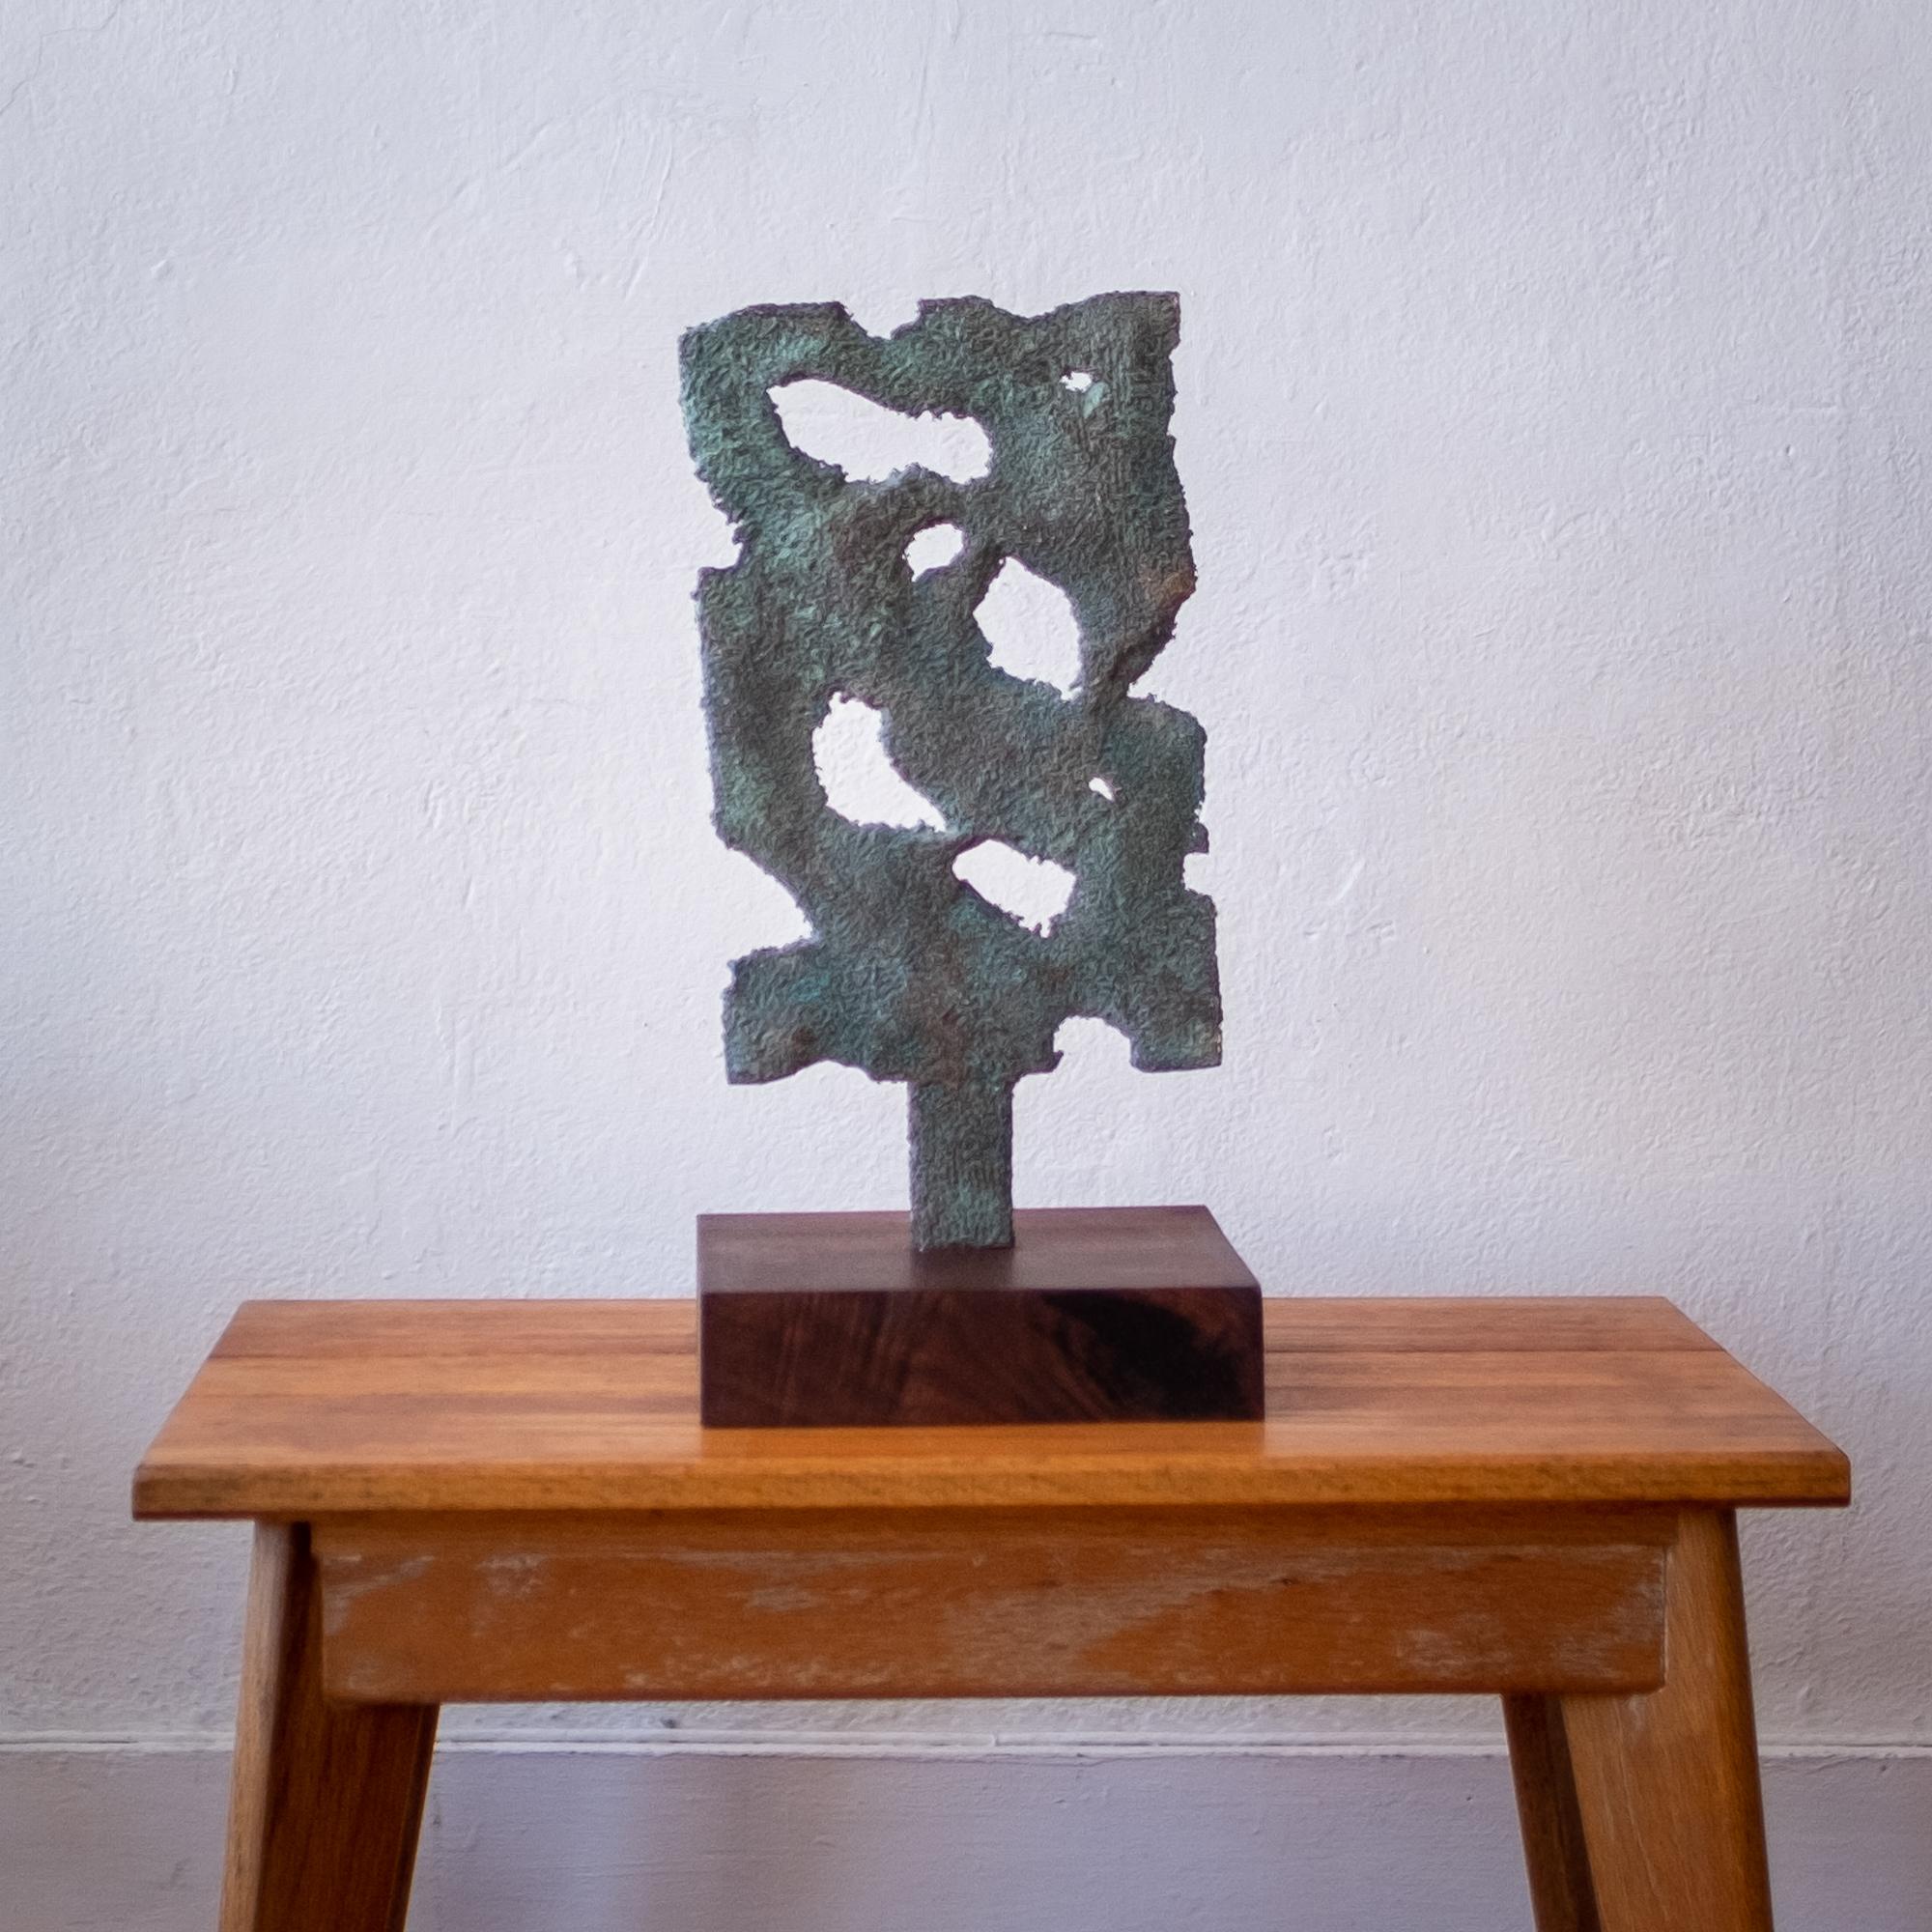 Untitled spill cast bronze abstract sculpture by 20th century American sculptor, Myrna Nobile. Purchased from artist's estate. Unsigned, 1960s

A unique voice in the 1960s San Diego contemporary art scene, Myrna Nobile received her M.A. and B.A.